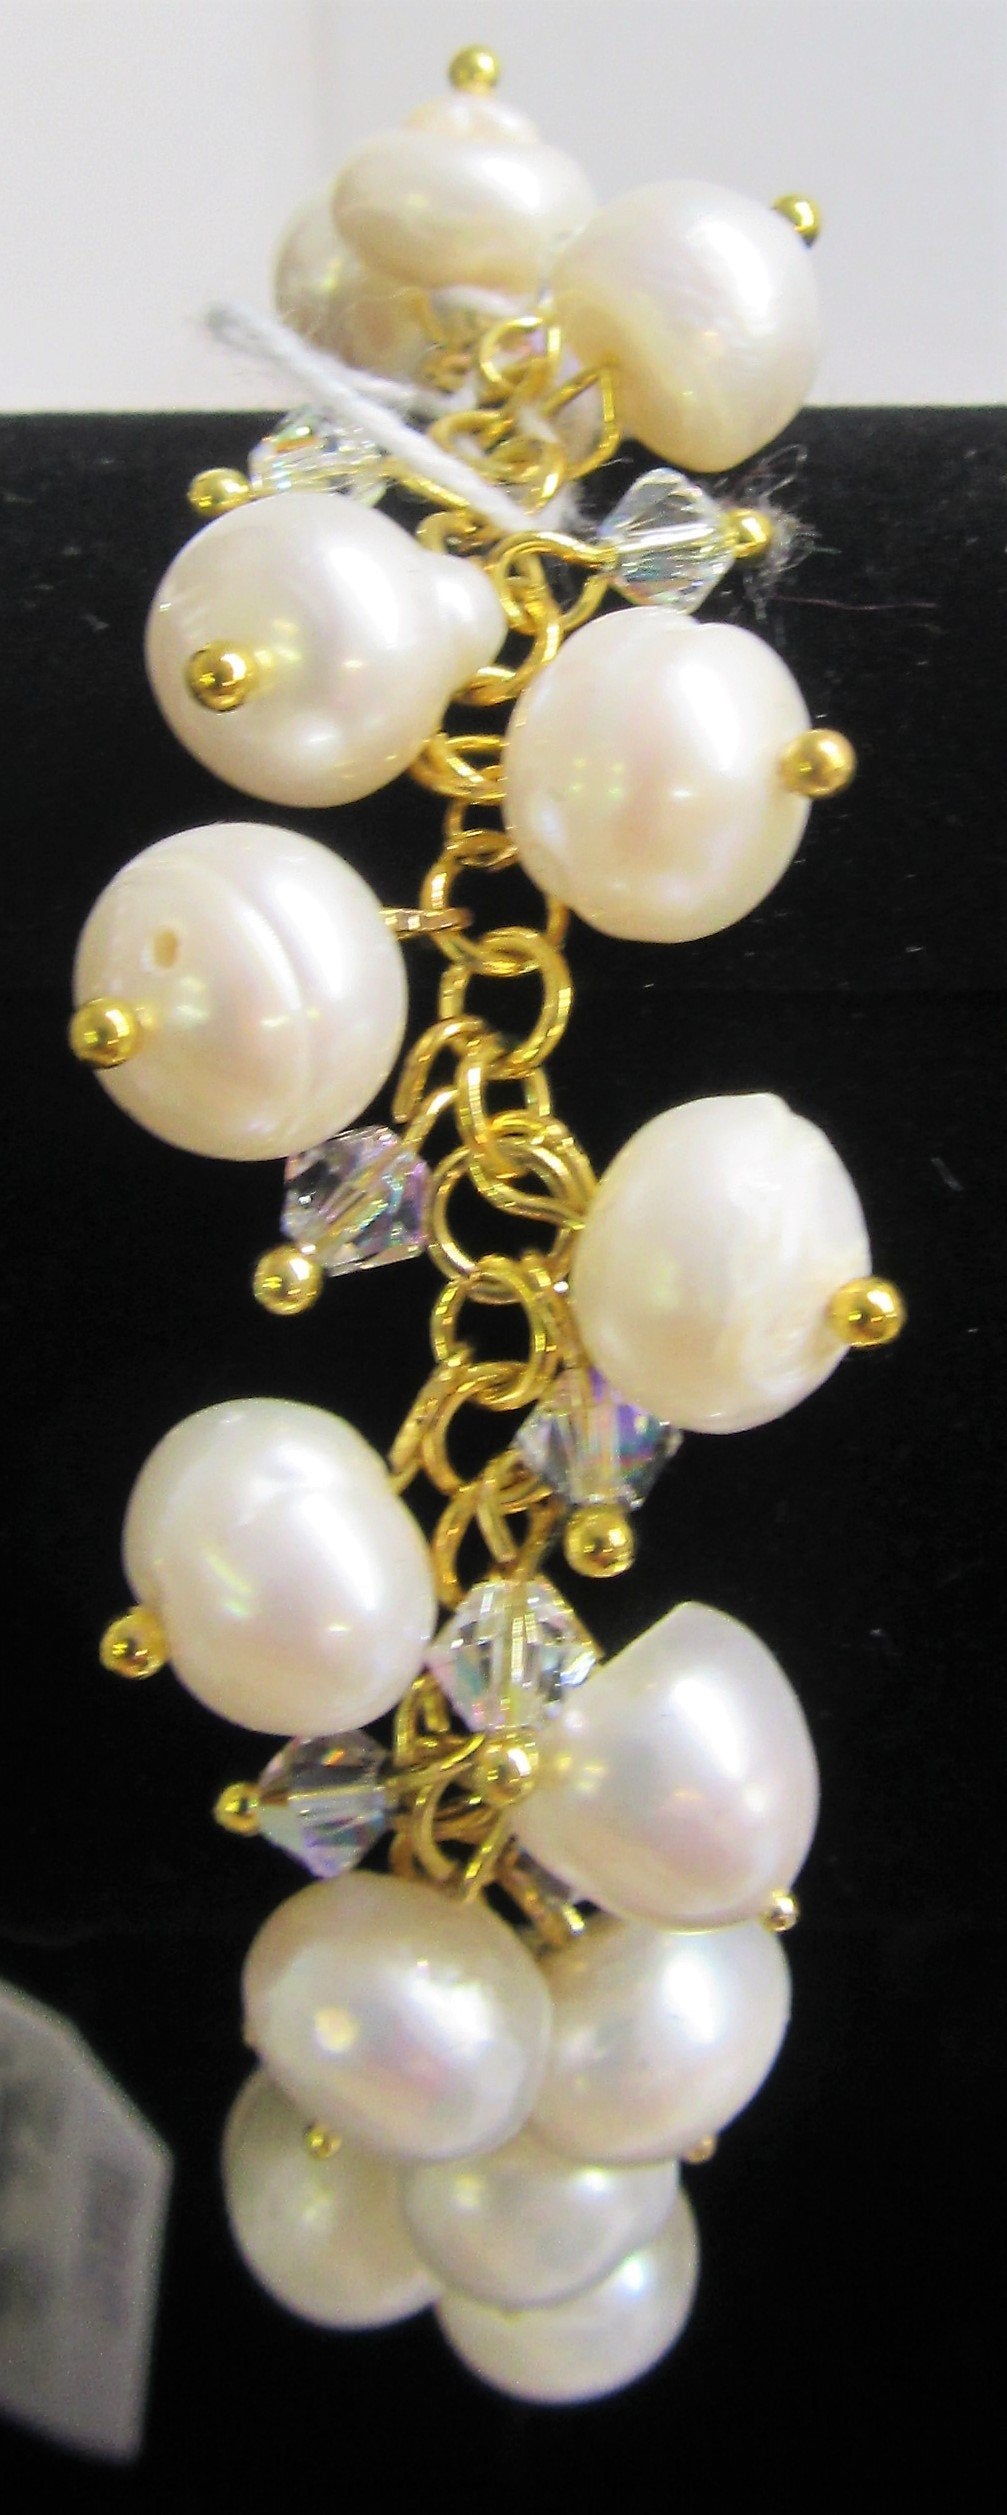 Beautiful handcrafted bracelet with freshwater pearls and swarovski crystals